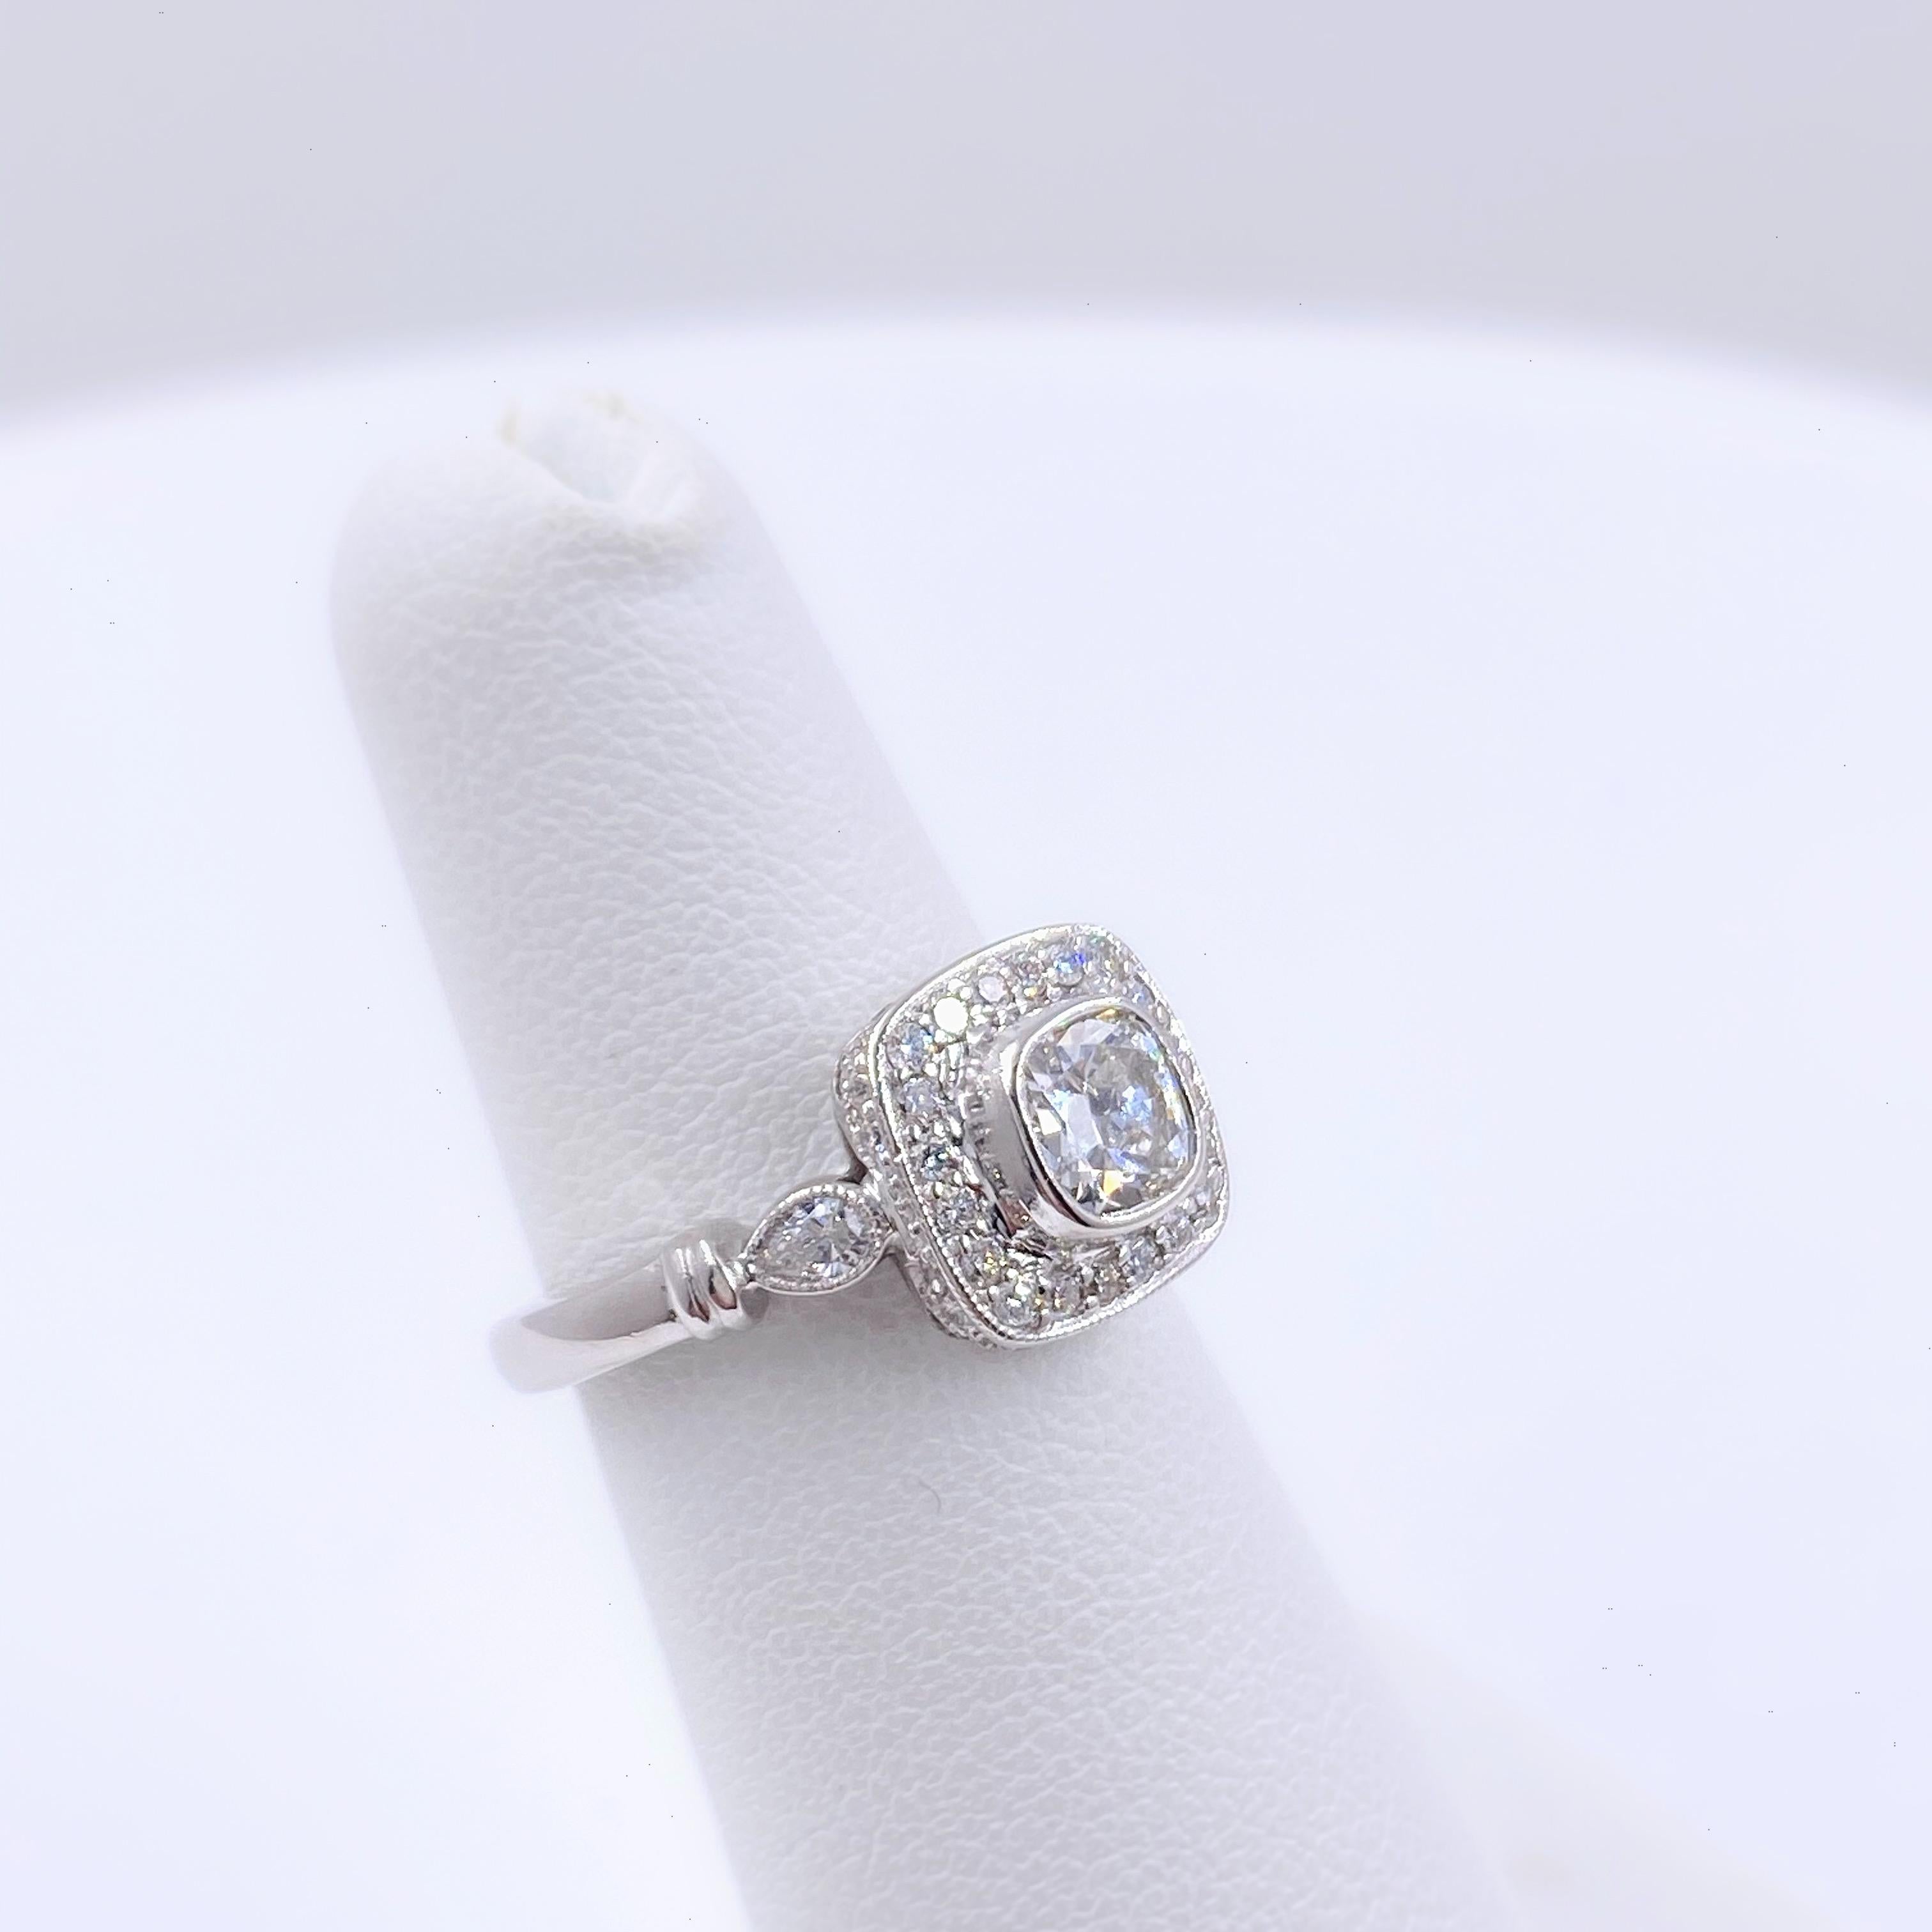 Cushion Diamond Engagement Ring 1.20 Carat 18 Karat White Gold In Excellent Condition For Sale In San Diego, CA